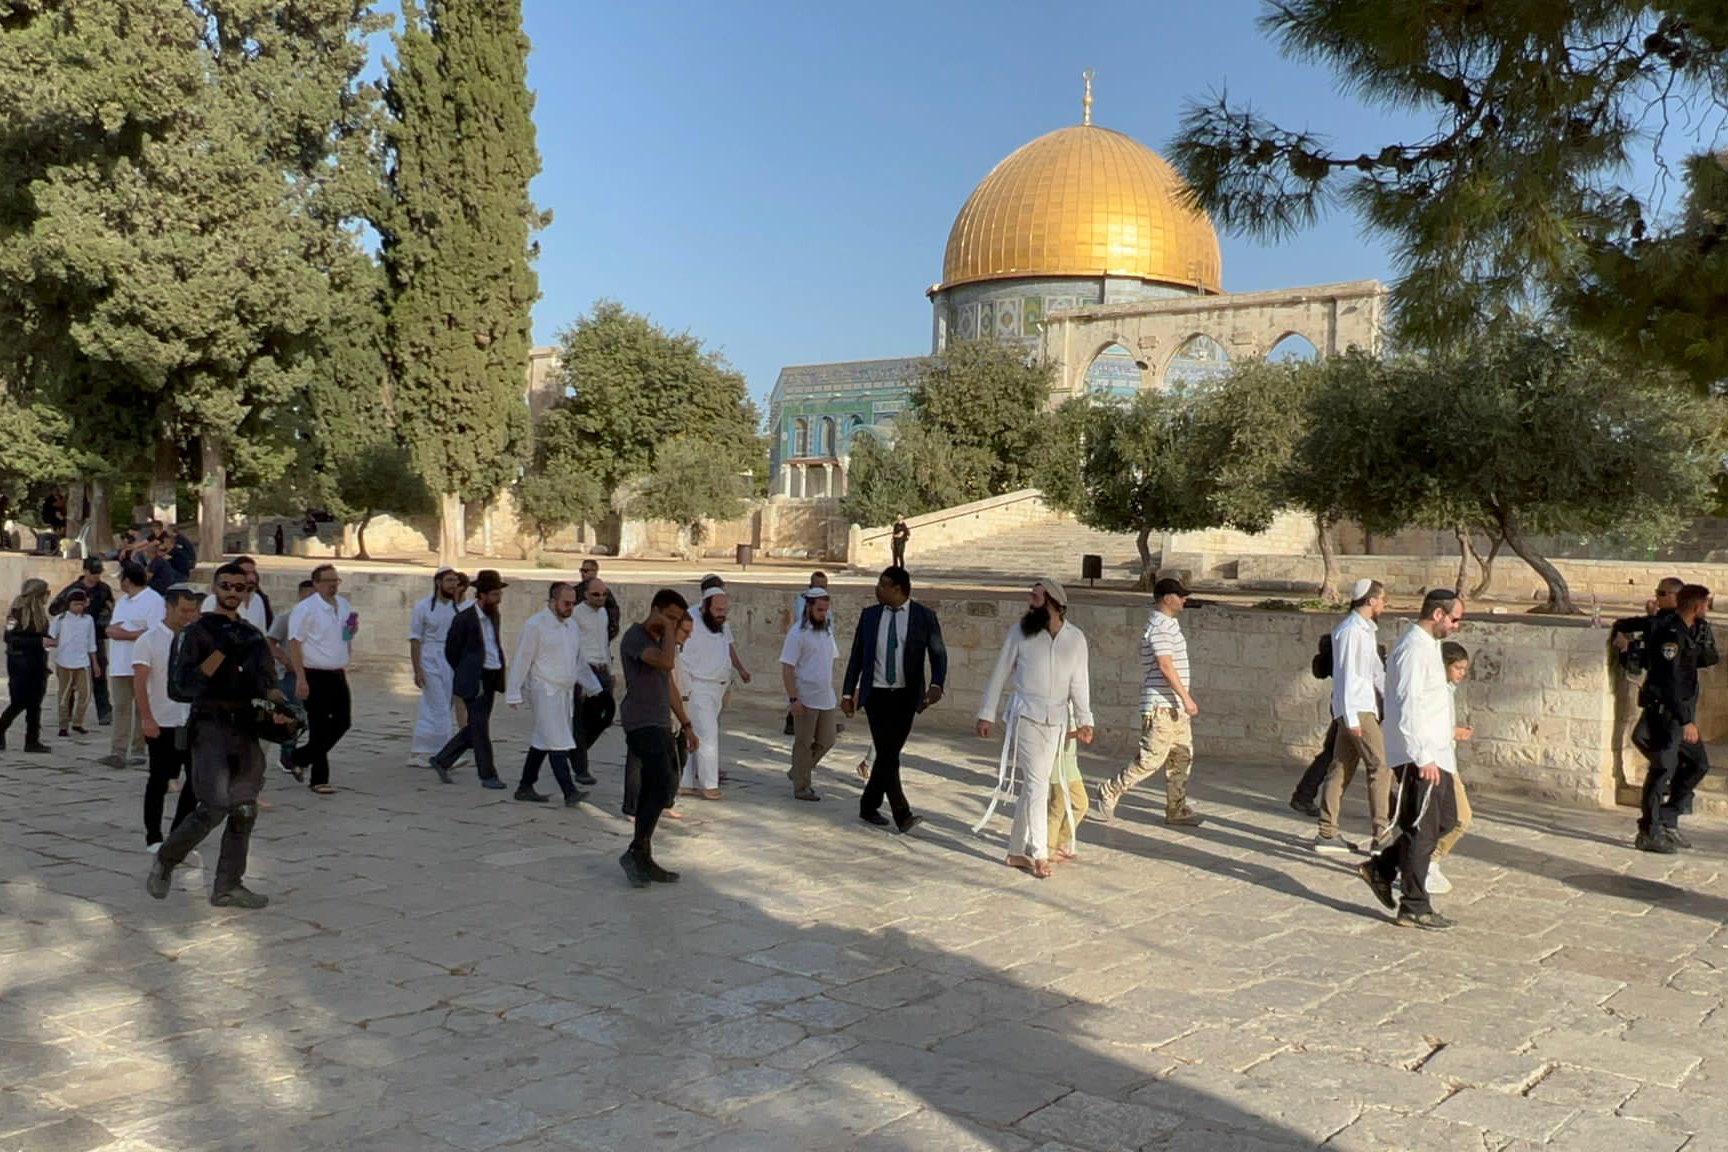 Groups of Israeli Jewish settlers invaded the courtyards of Al-Aqsa Mosque in occupied Jerusalem under the protection of Israeli occupation forces on Monday morning, February 20, 2023.